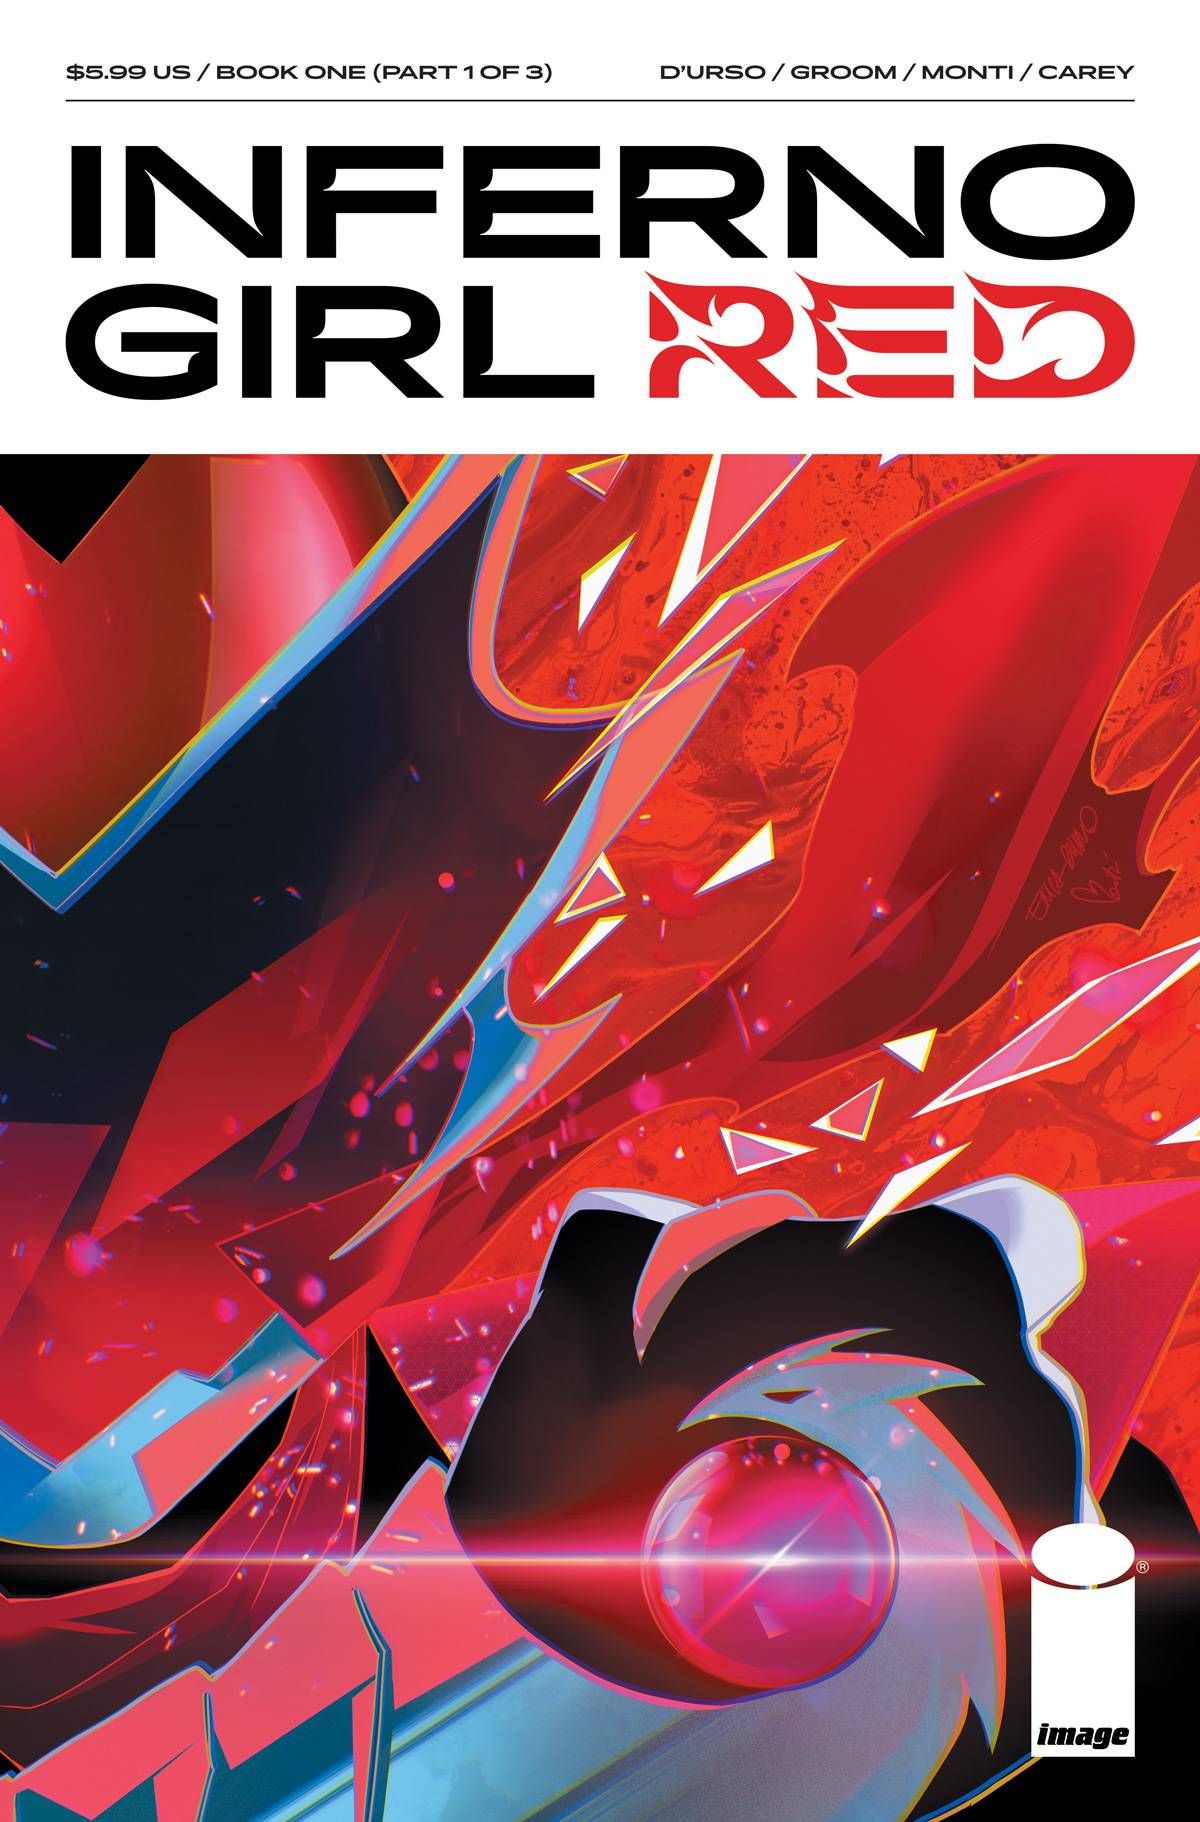 Inferno Girl Red - Book One #1 Comic